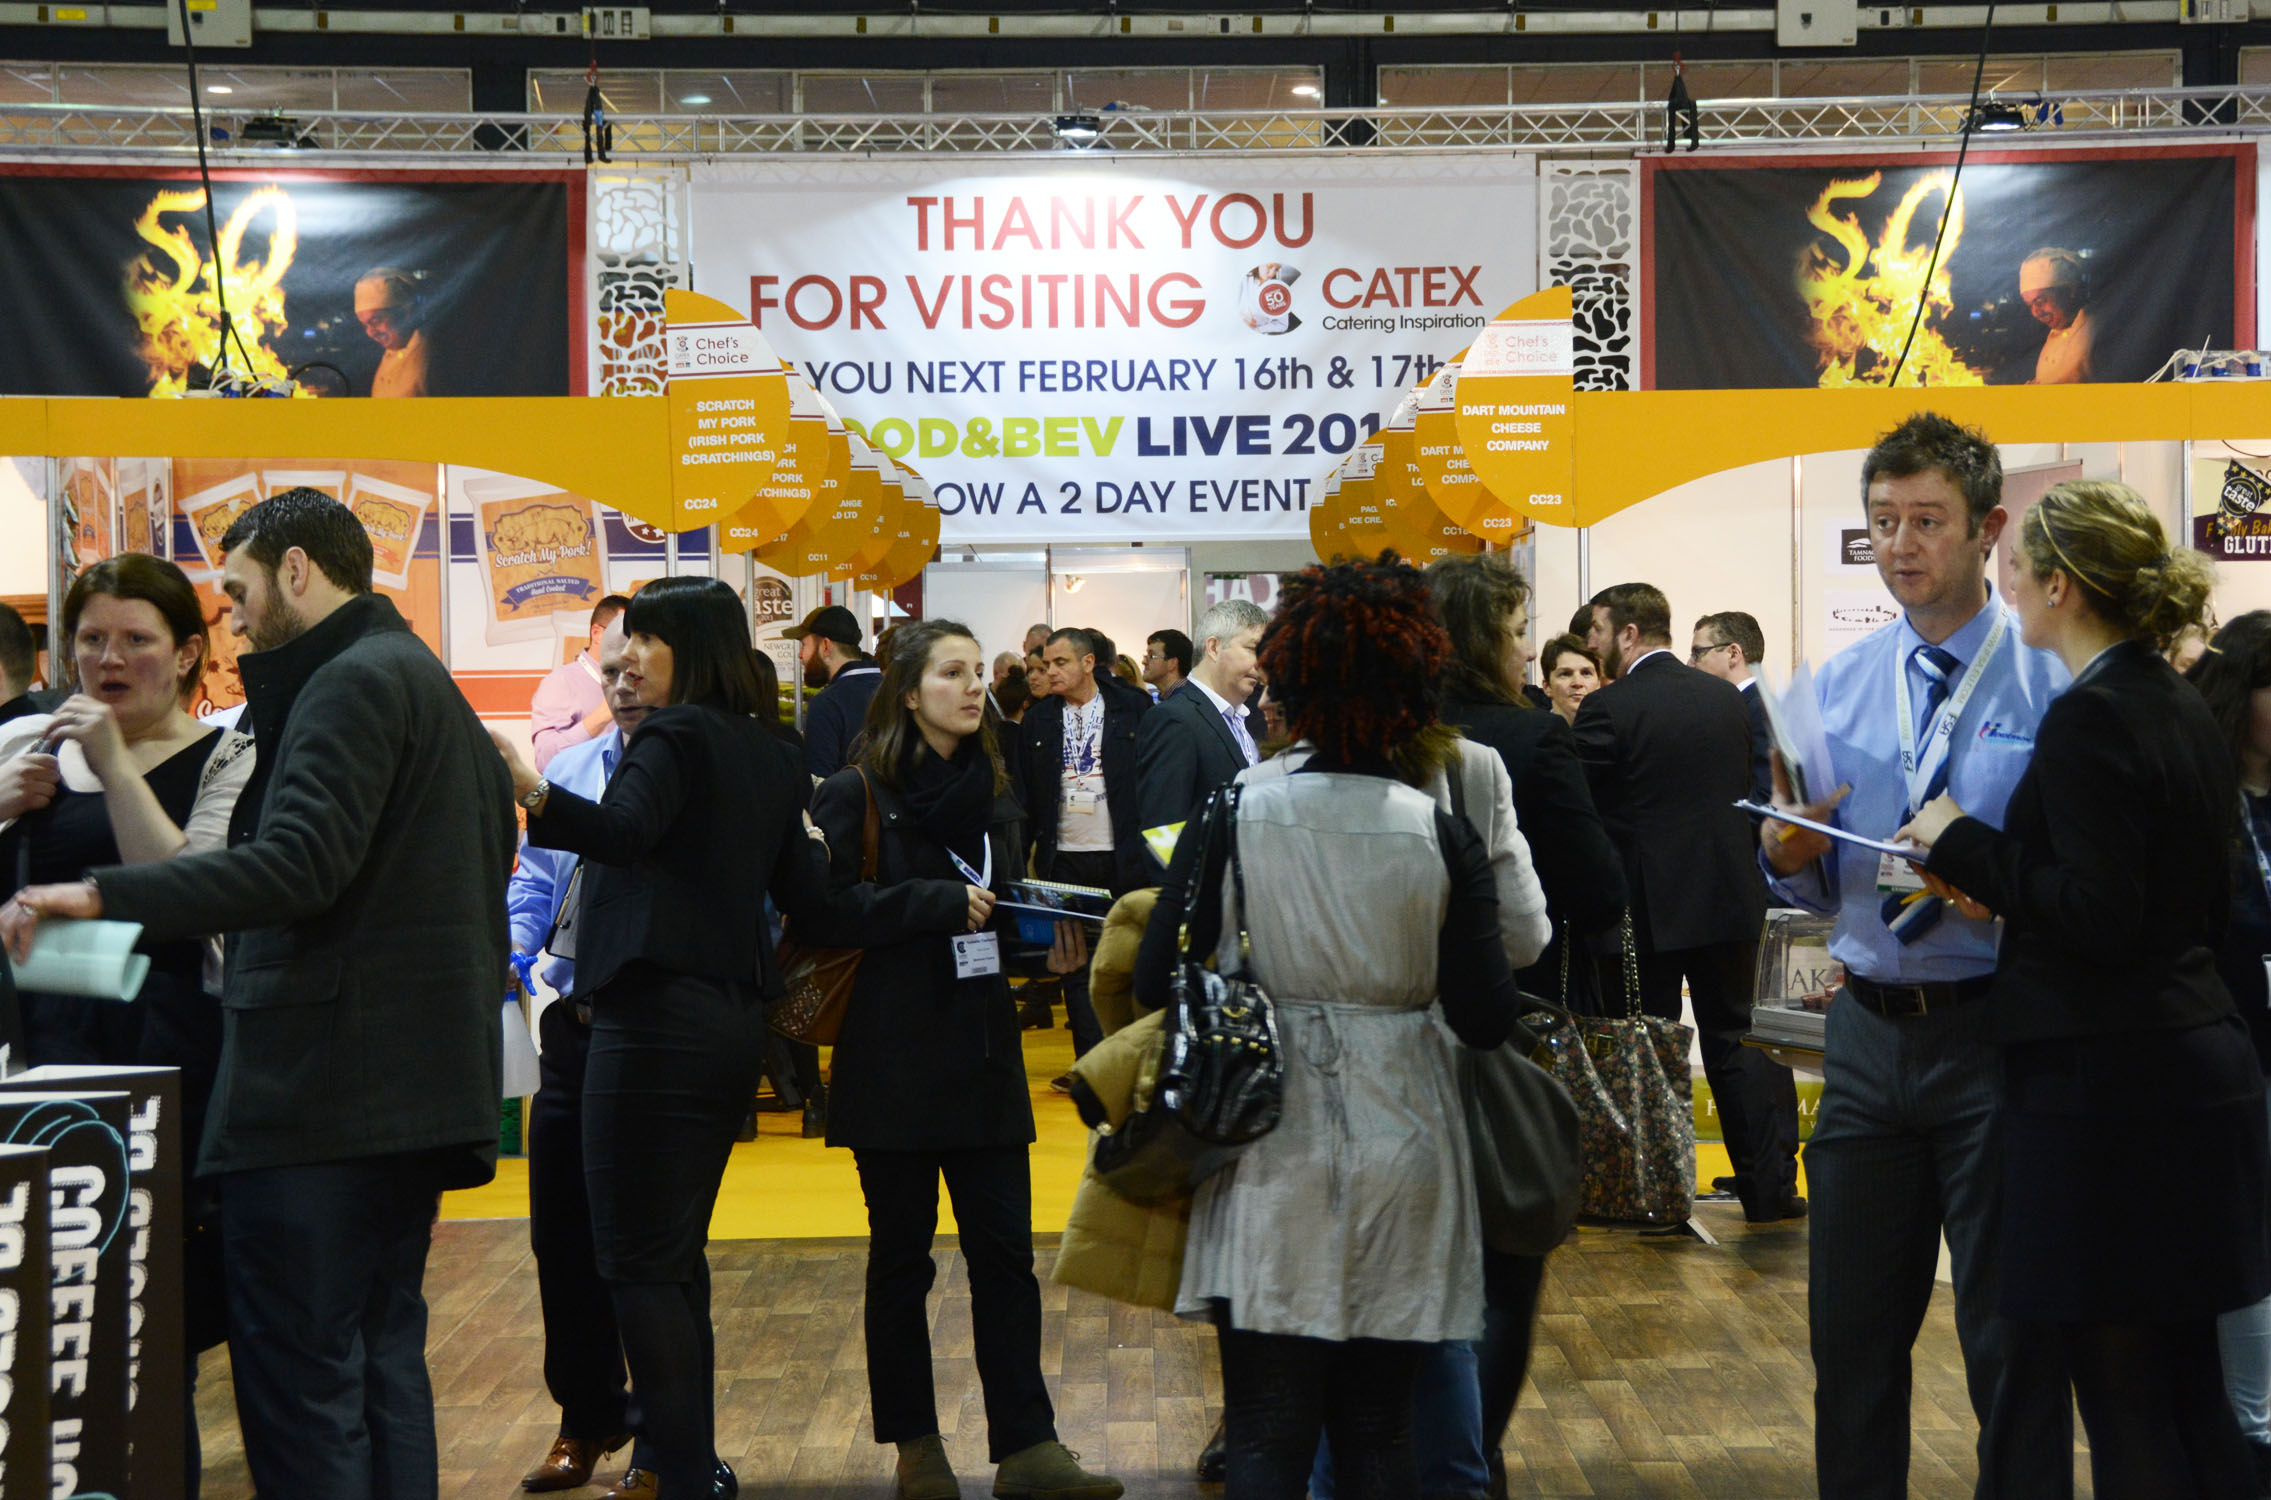 2017 sees the return of Ireland’s biggest foodservice event, CATEX, with a new-look layout and new exhibitors.